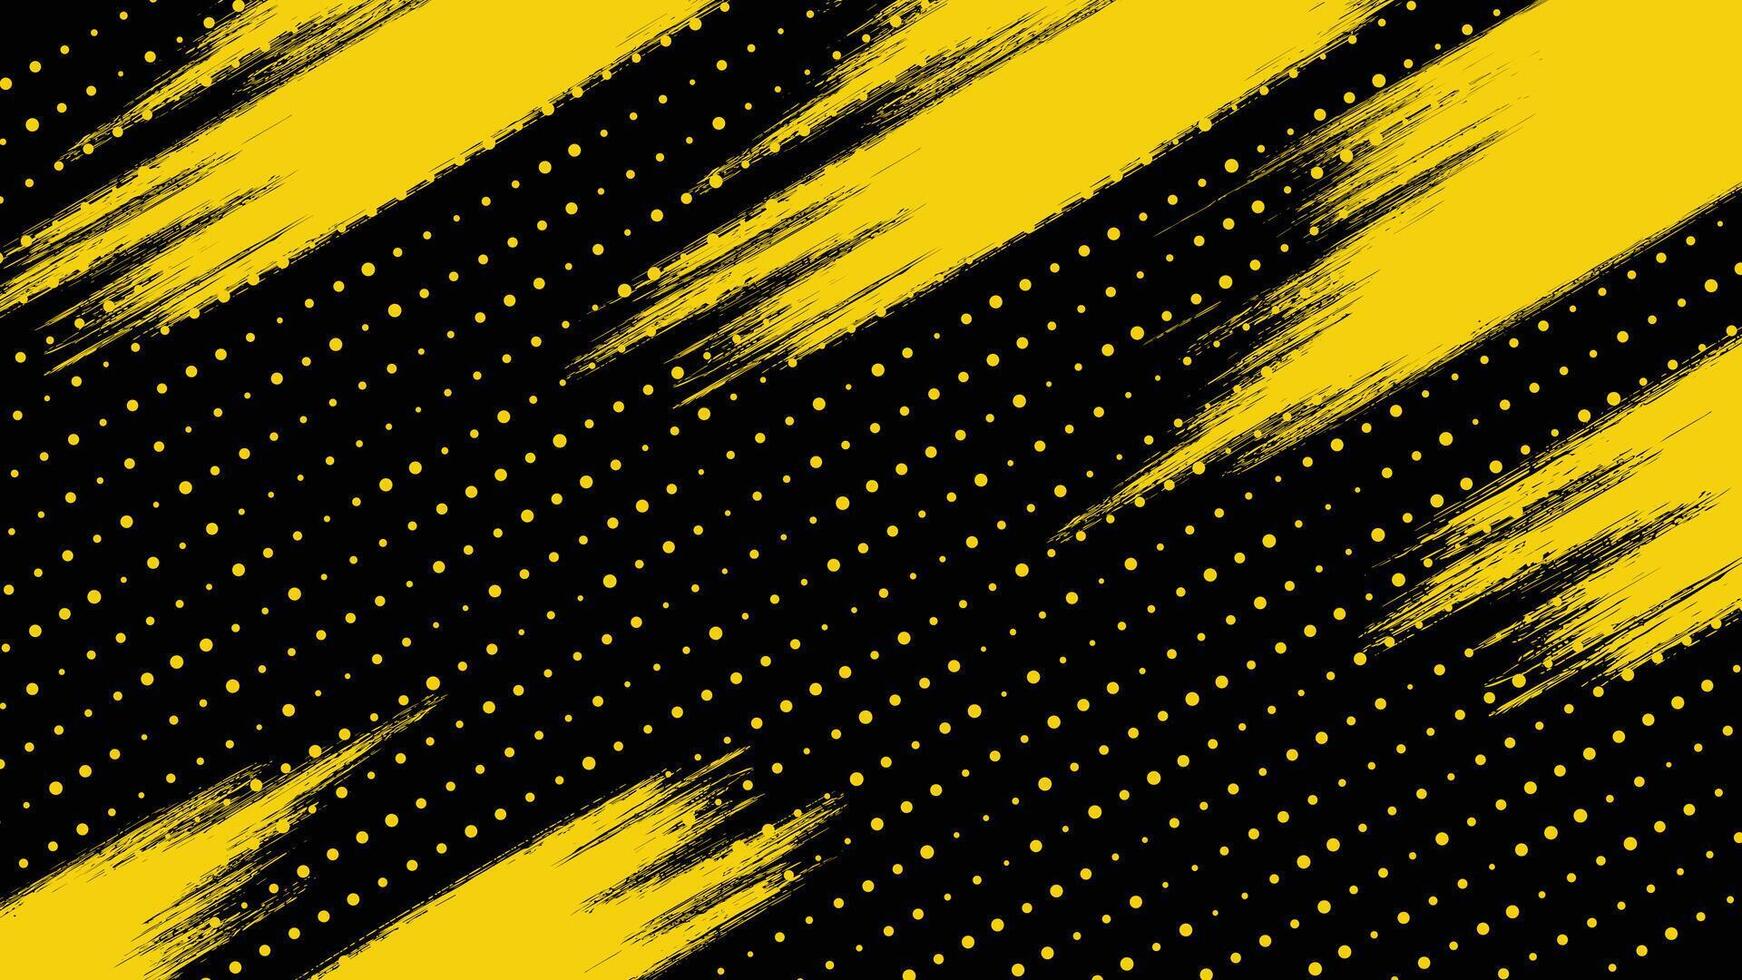 Abstract Grunge Texture with Halftone Background vector